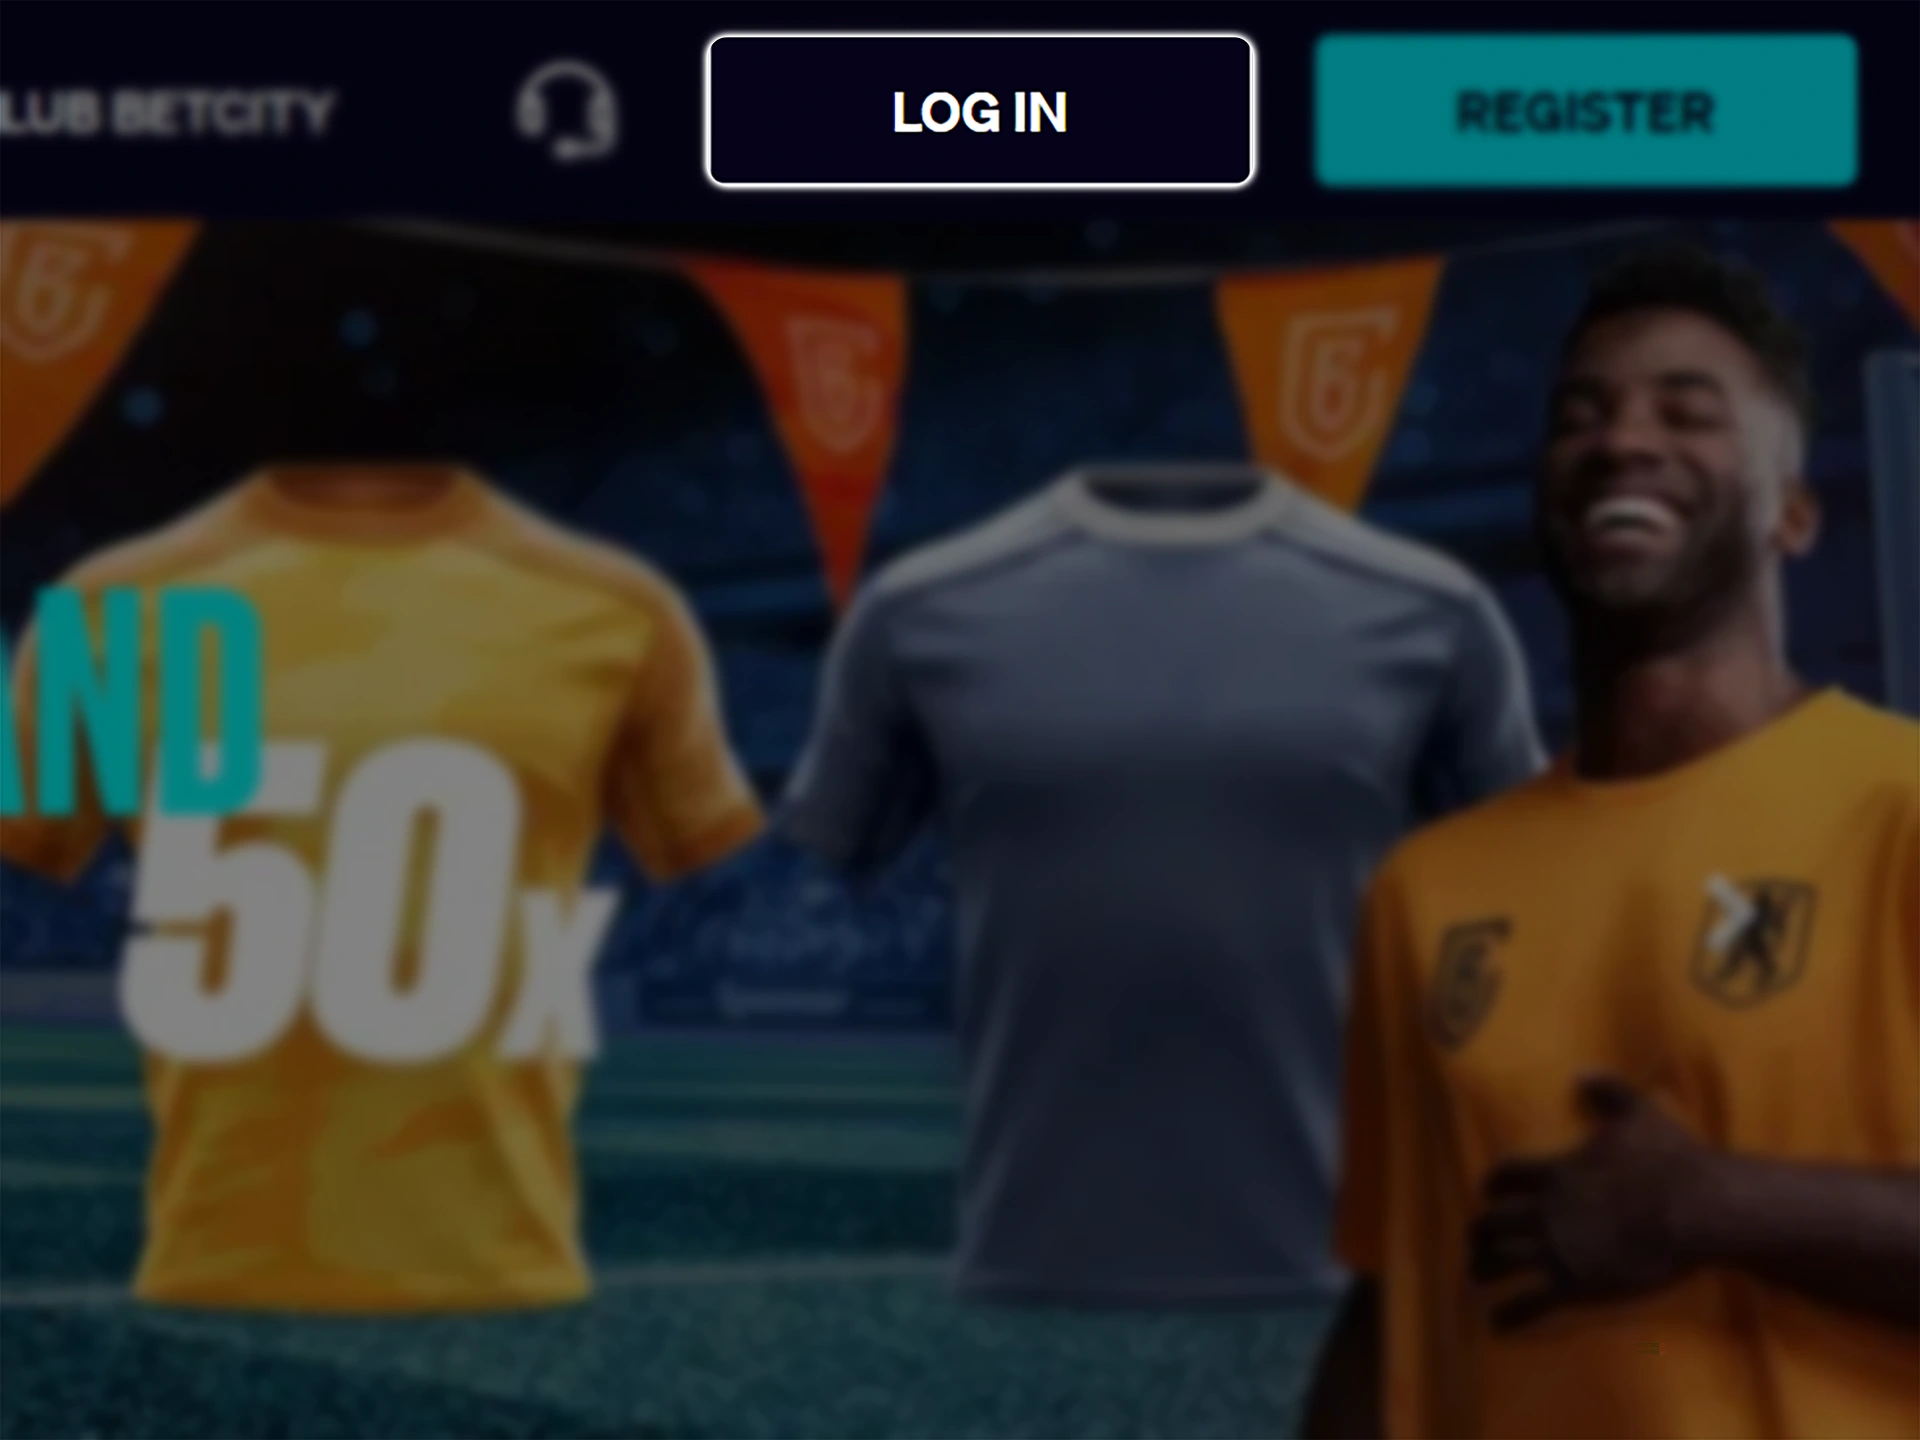 Once you have completed the registration process, log in to your Betcity account.